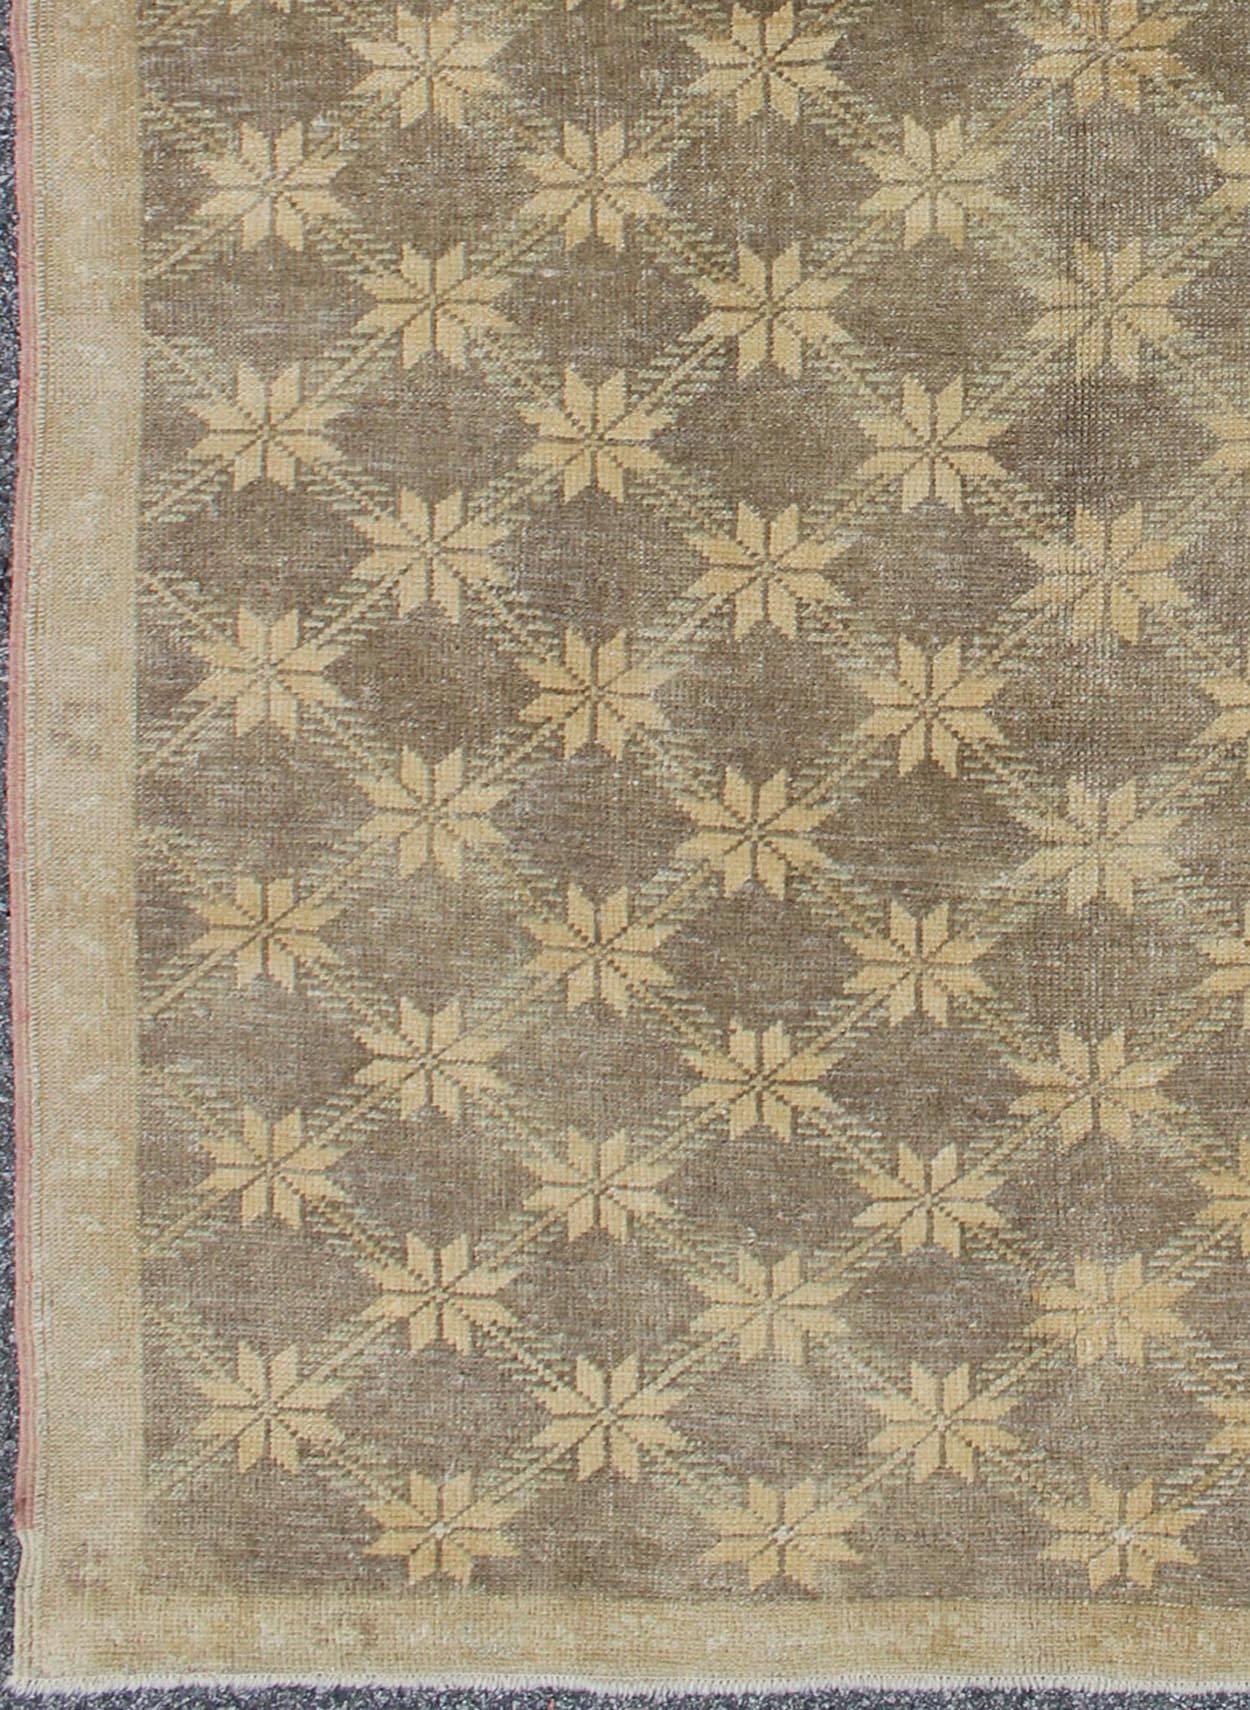 Brown midcentury vintage Turkish Oushak rug with floral or star lattice pattern, rug en-4463, country of origin / type: Turkey / Oushak, circa mid-20th century.

The design of this beautiful vintage Oushak rug from mid-20th century Turkey is